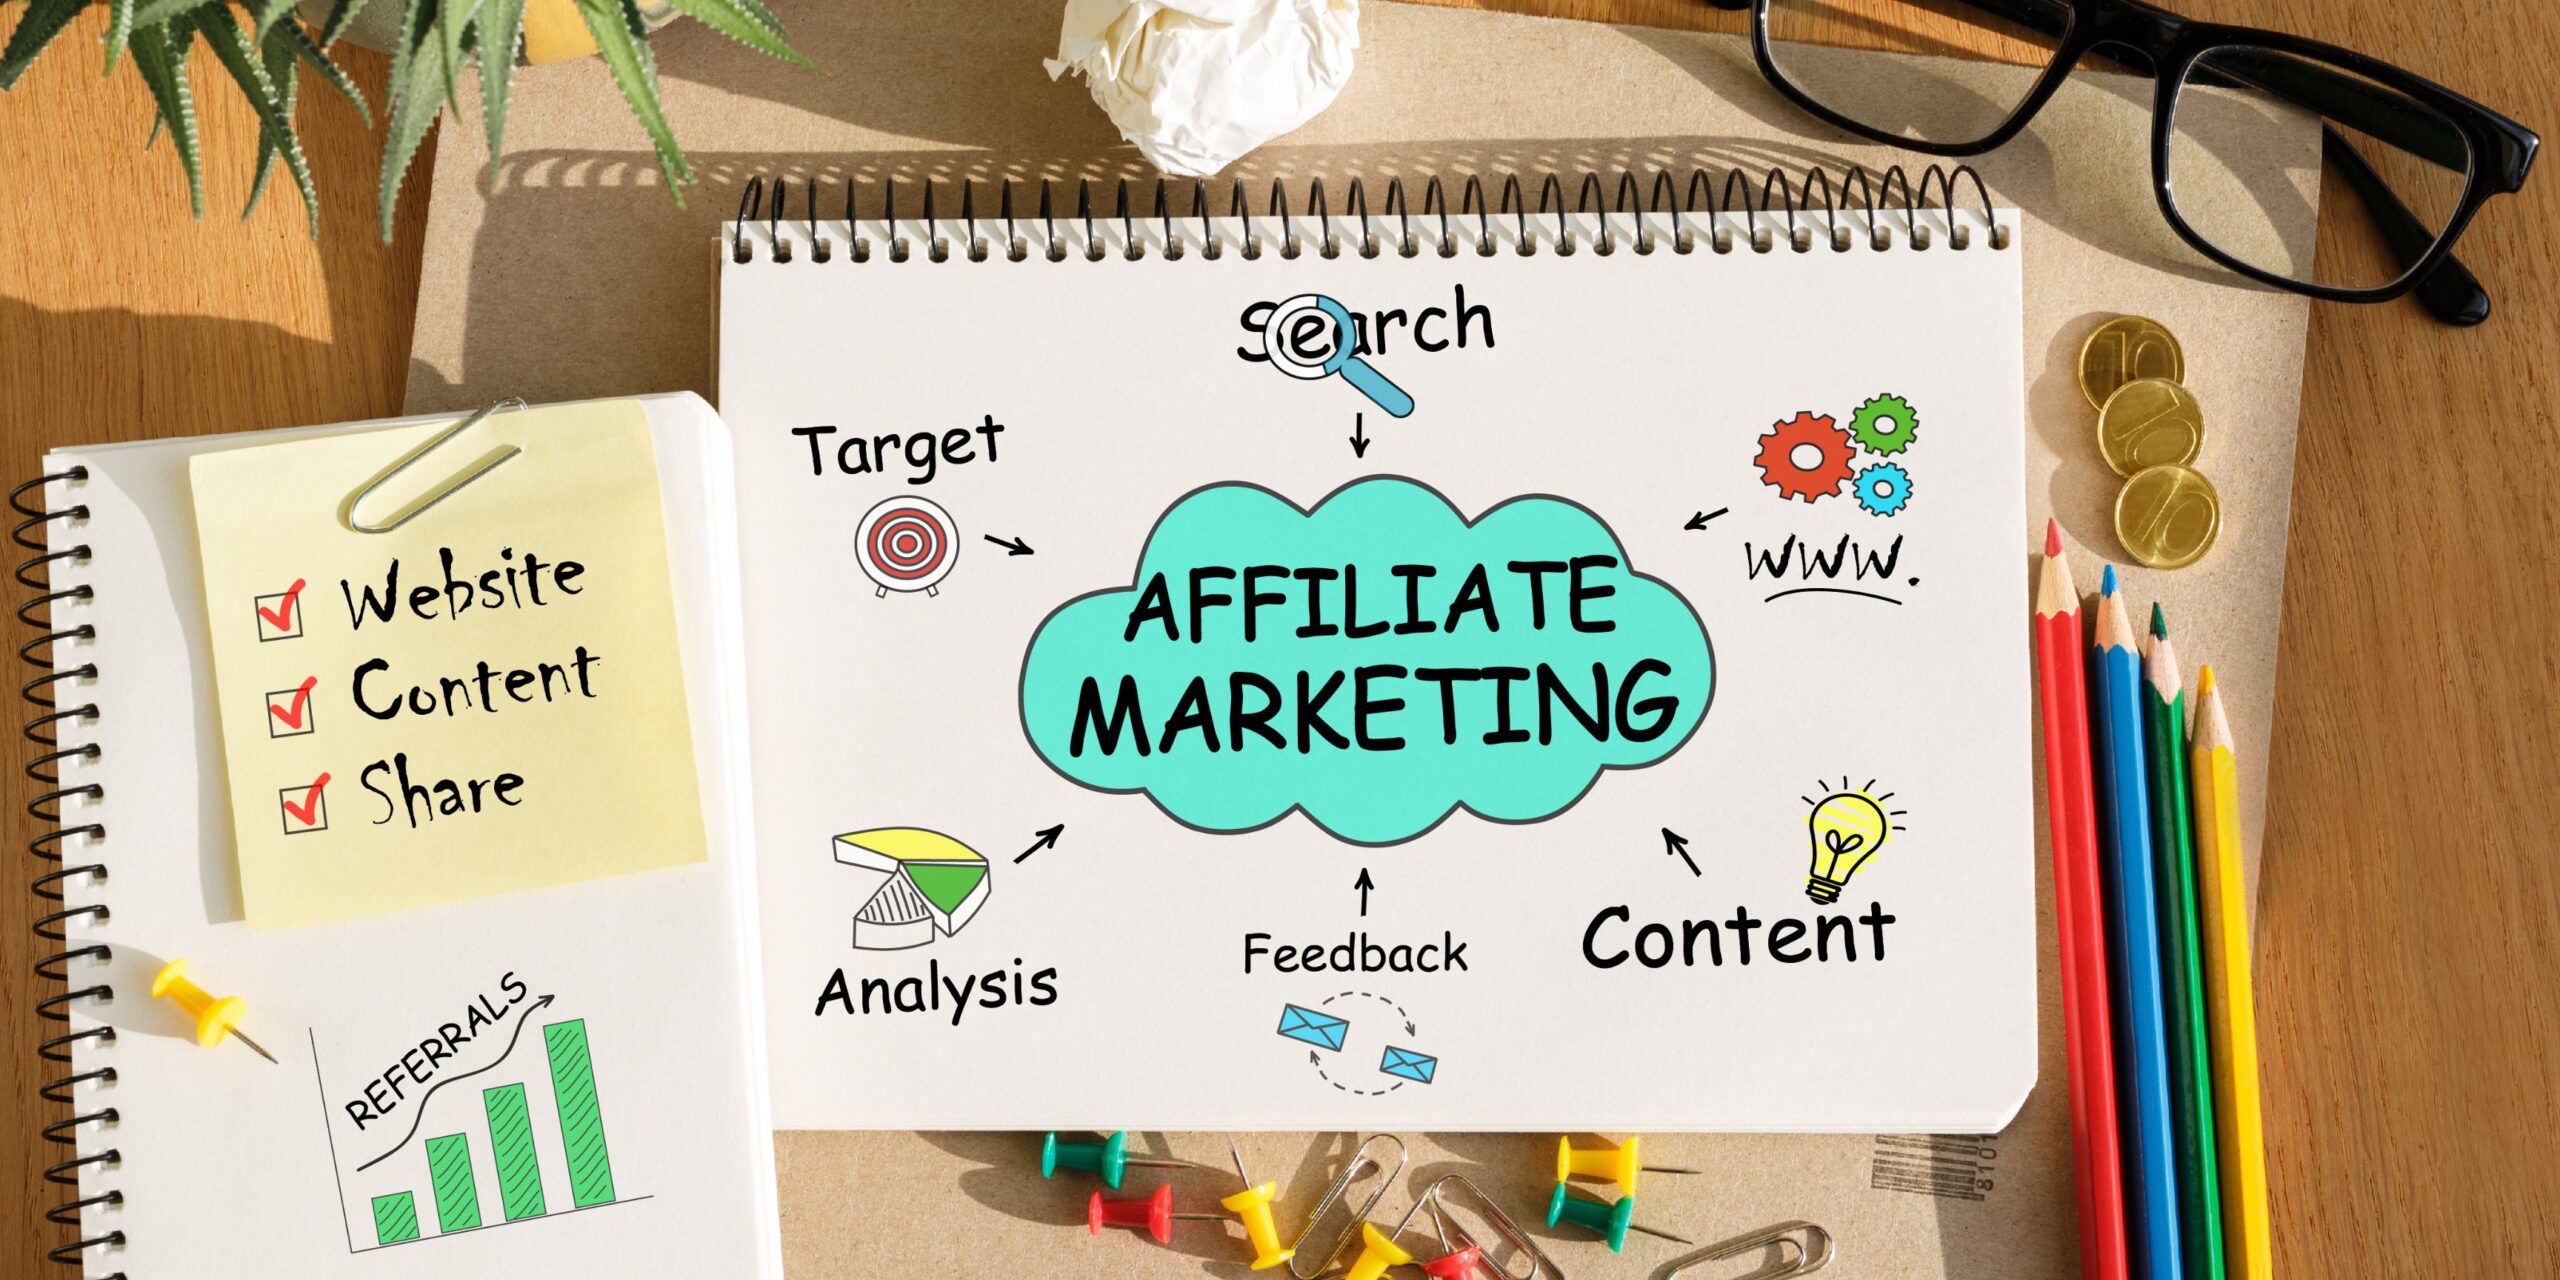 Get started with affiliate marketing